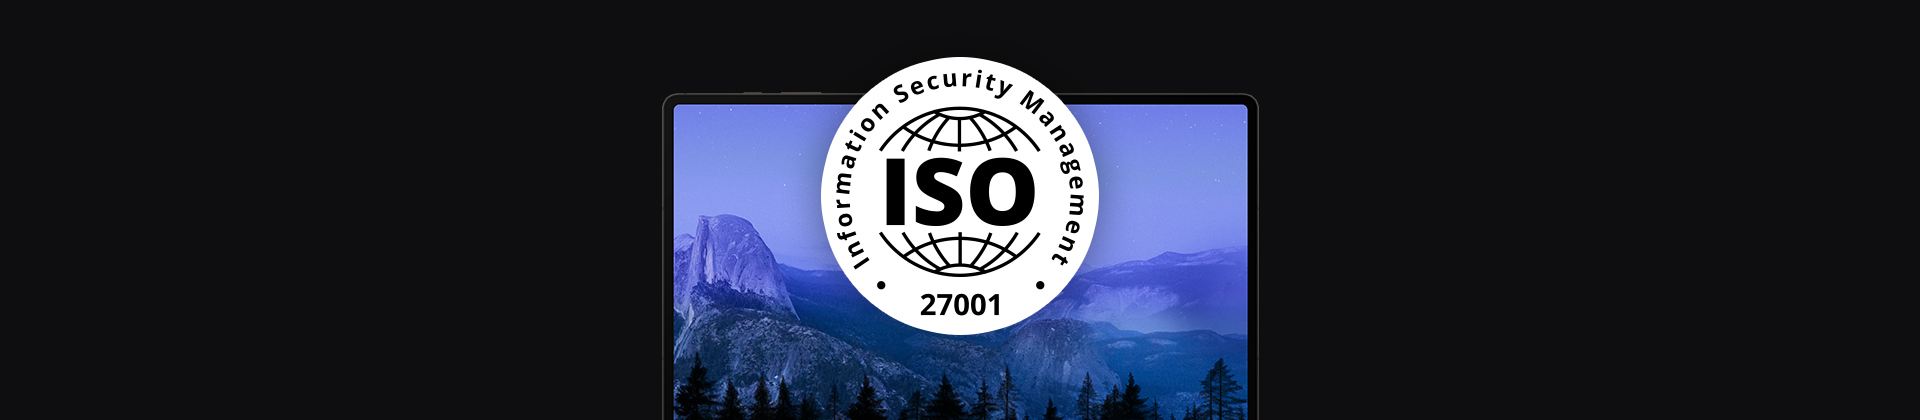 banner with laptop and ISO 27001 logo